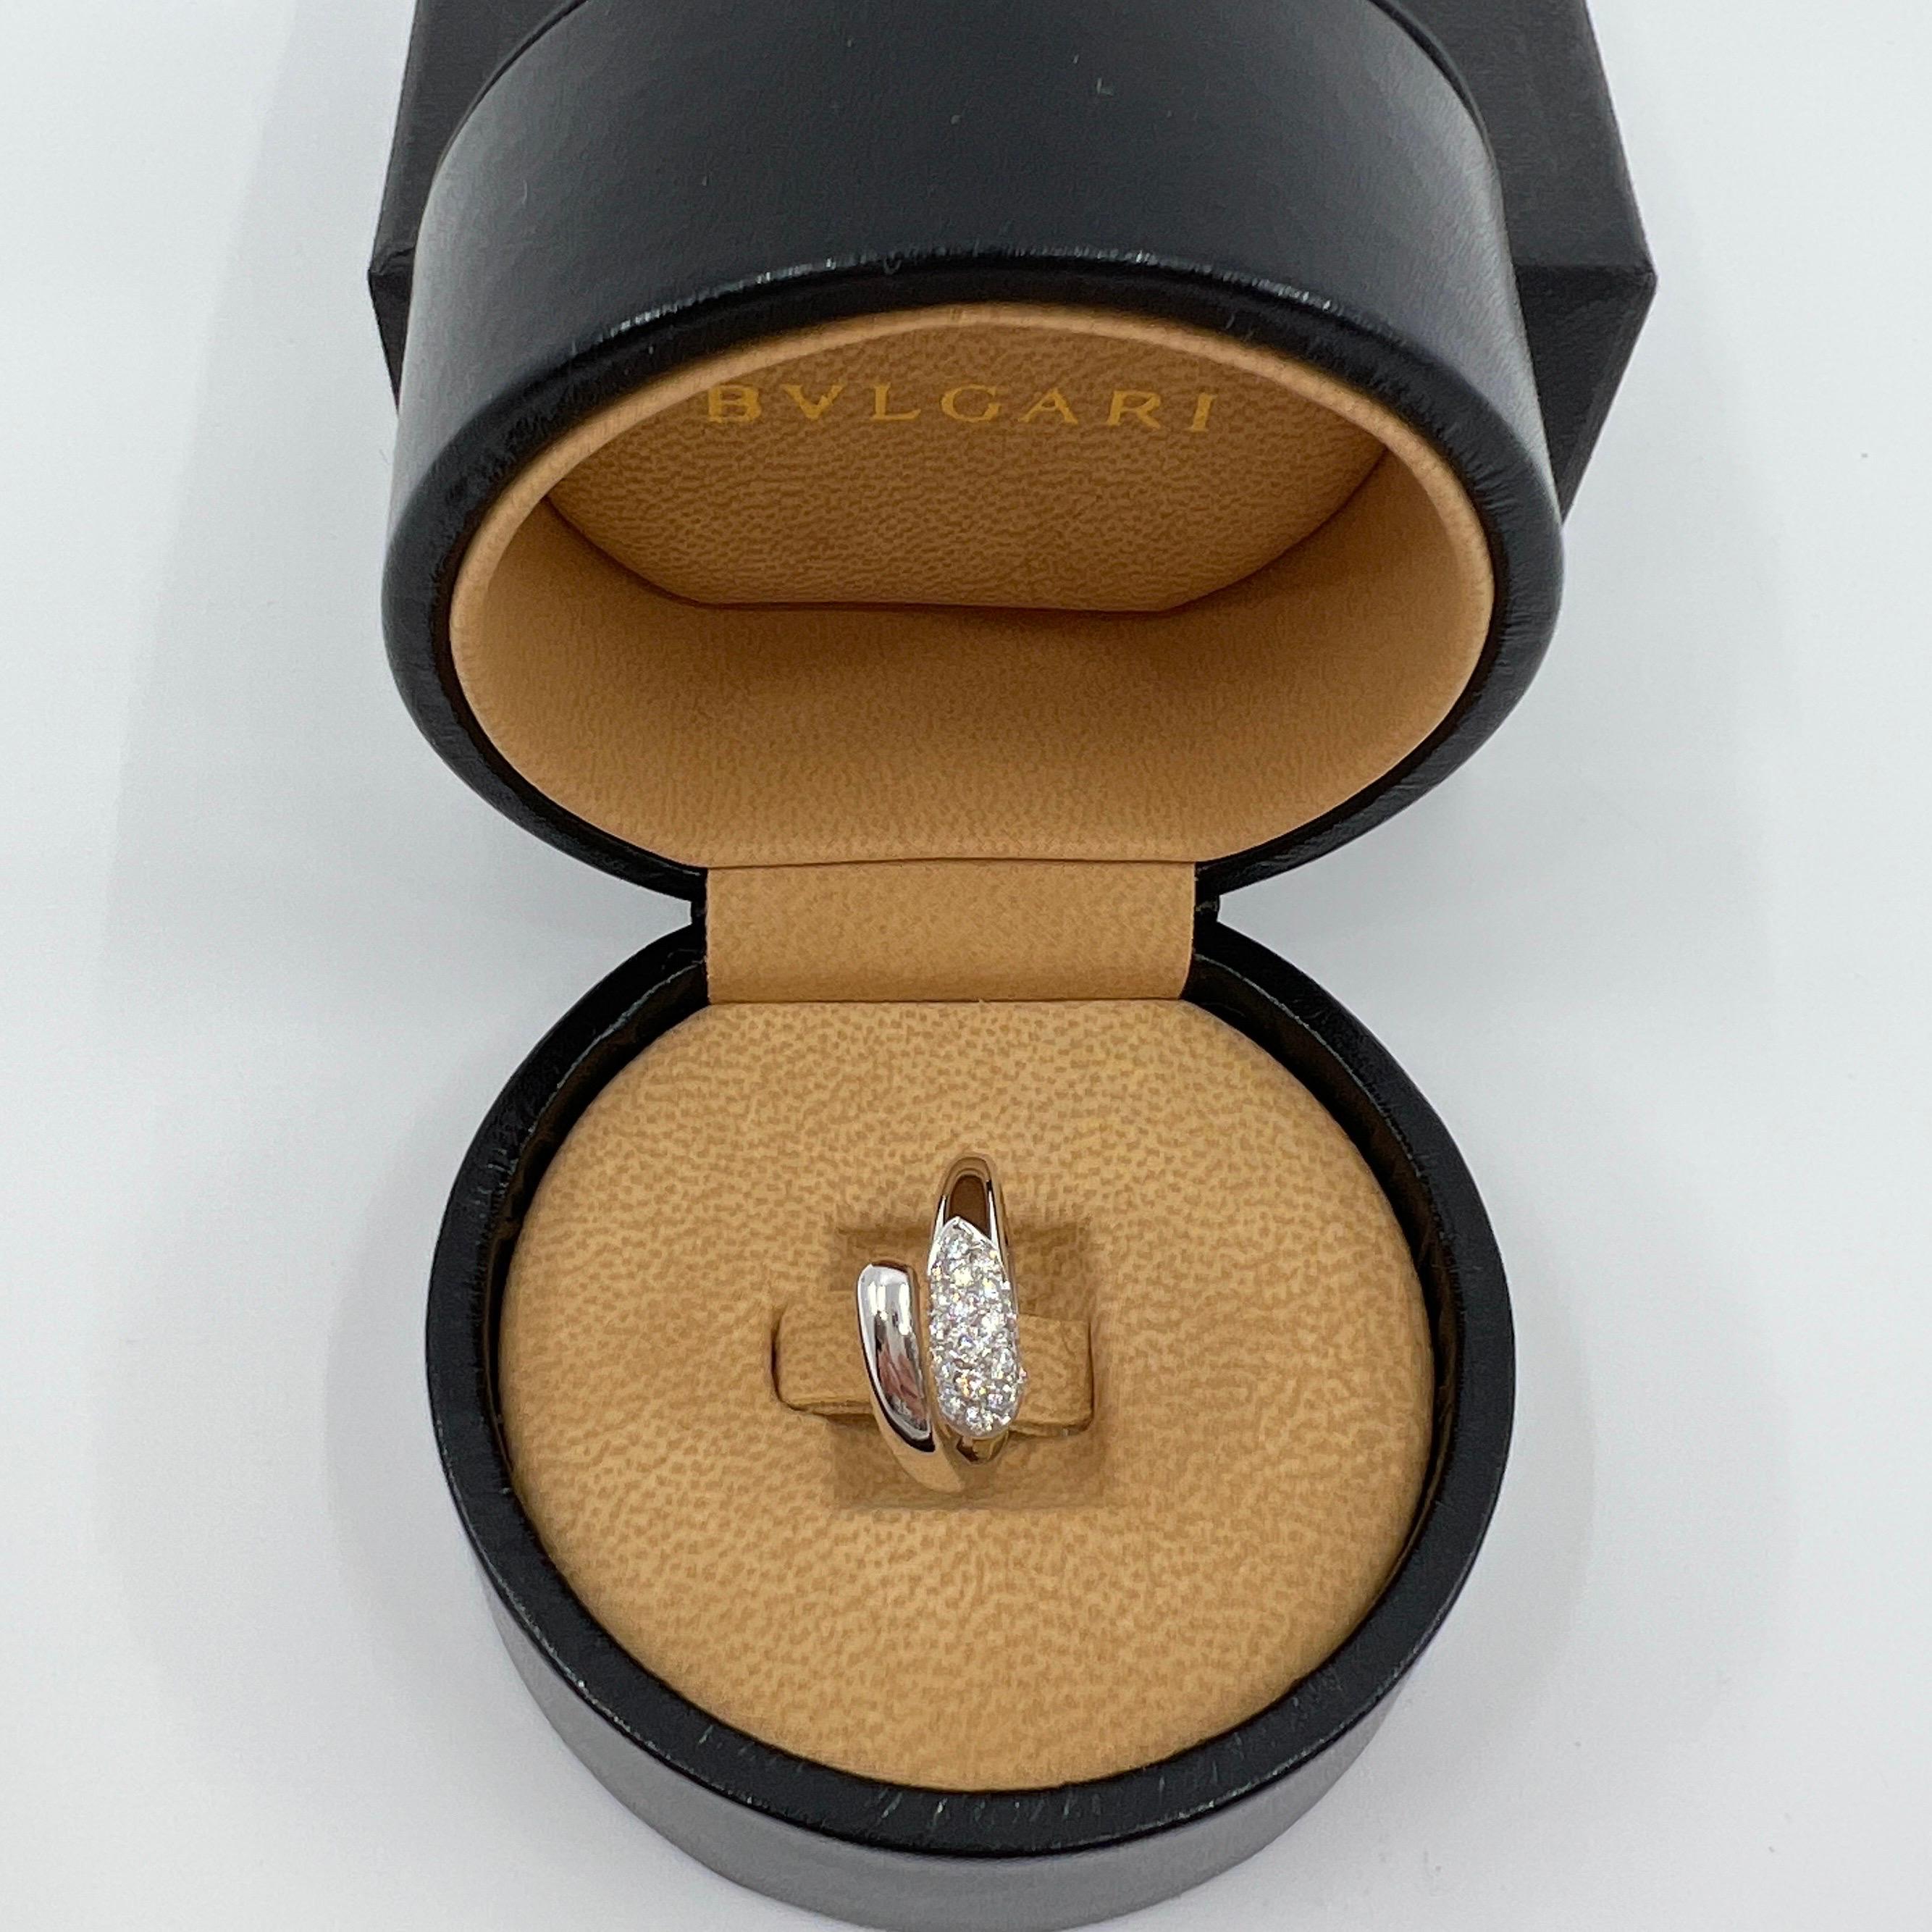 Bvlgari Astraea Diamond Pave 18k White Gold Ring.

The classic Bvlgari snake theme from the more modern Astraea line, this 18K white gold ring wraps comfortably around the finger. 

The ring is beautifully pave set with 22 fine round brilliant cut